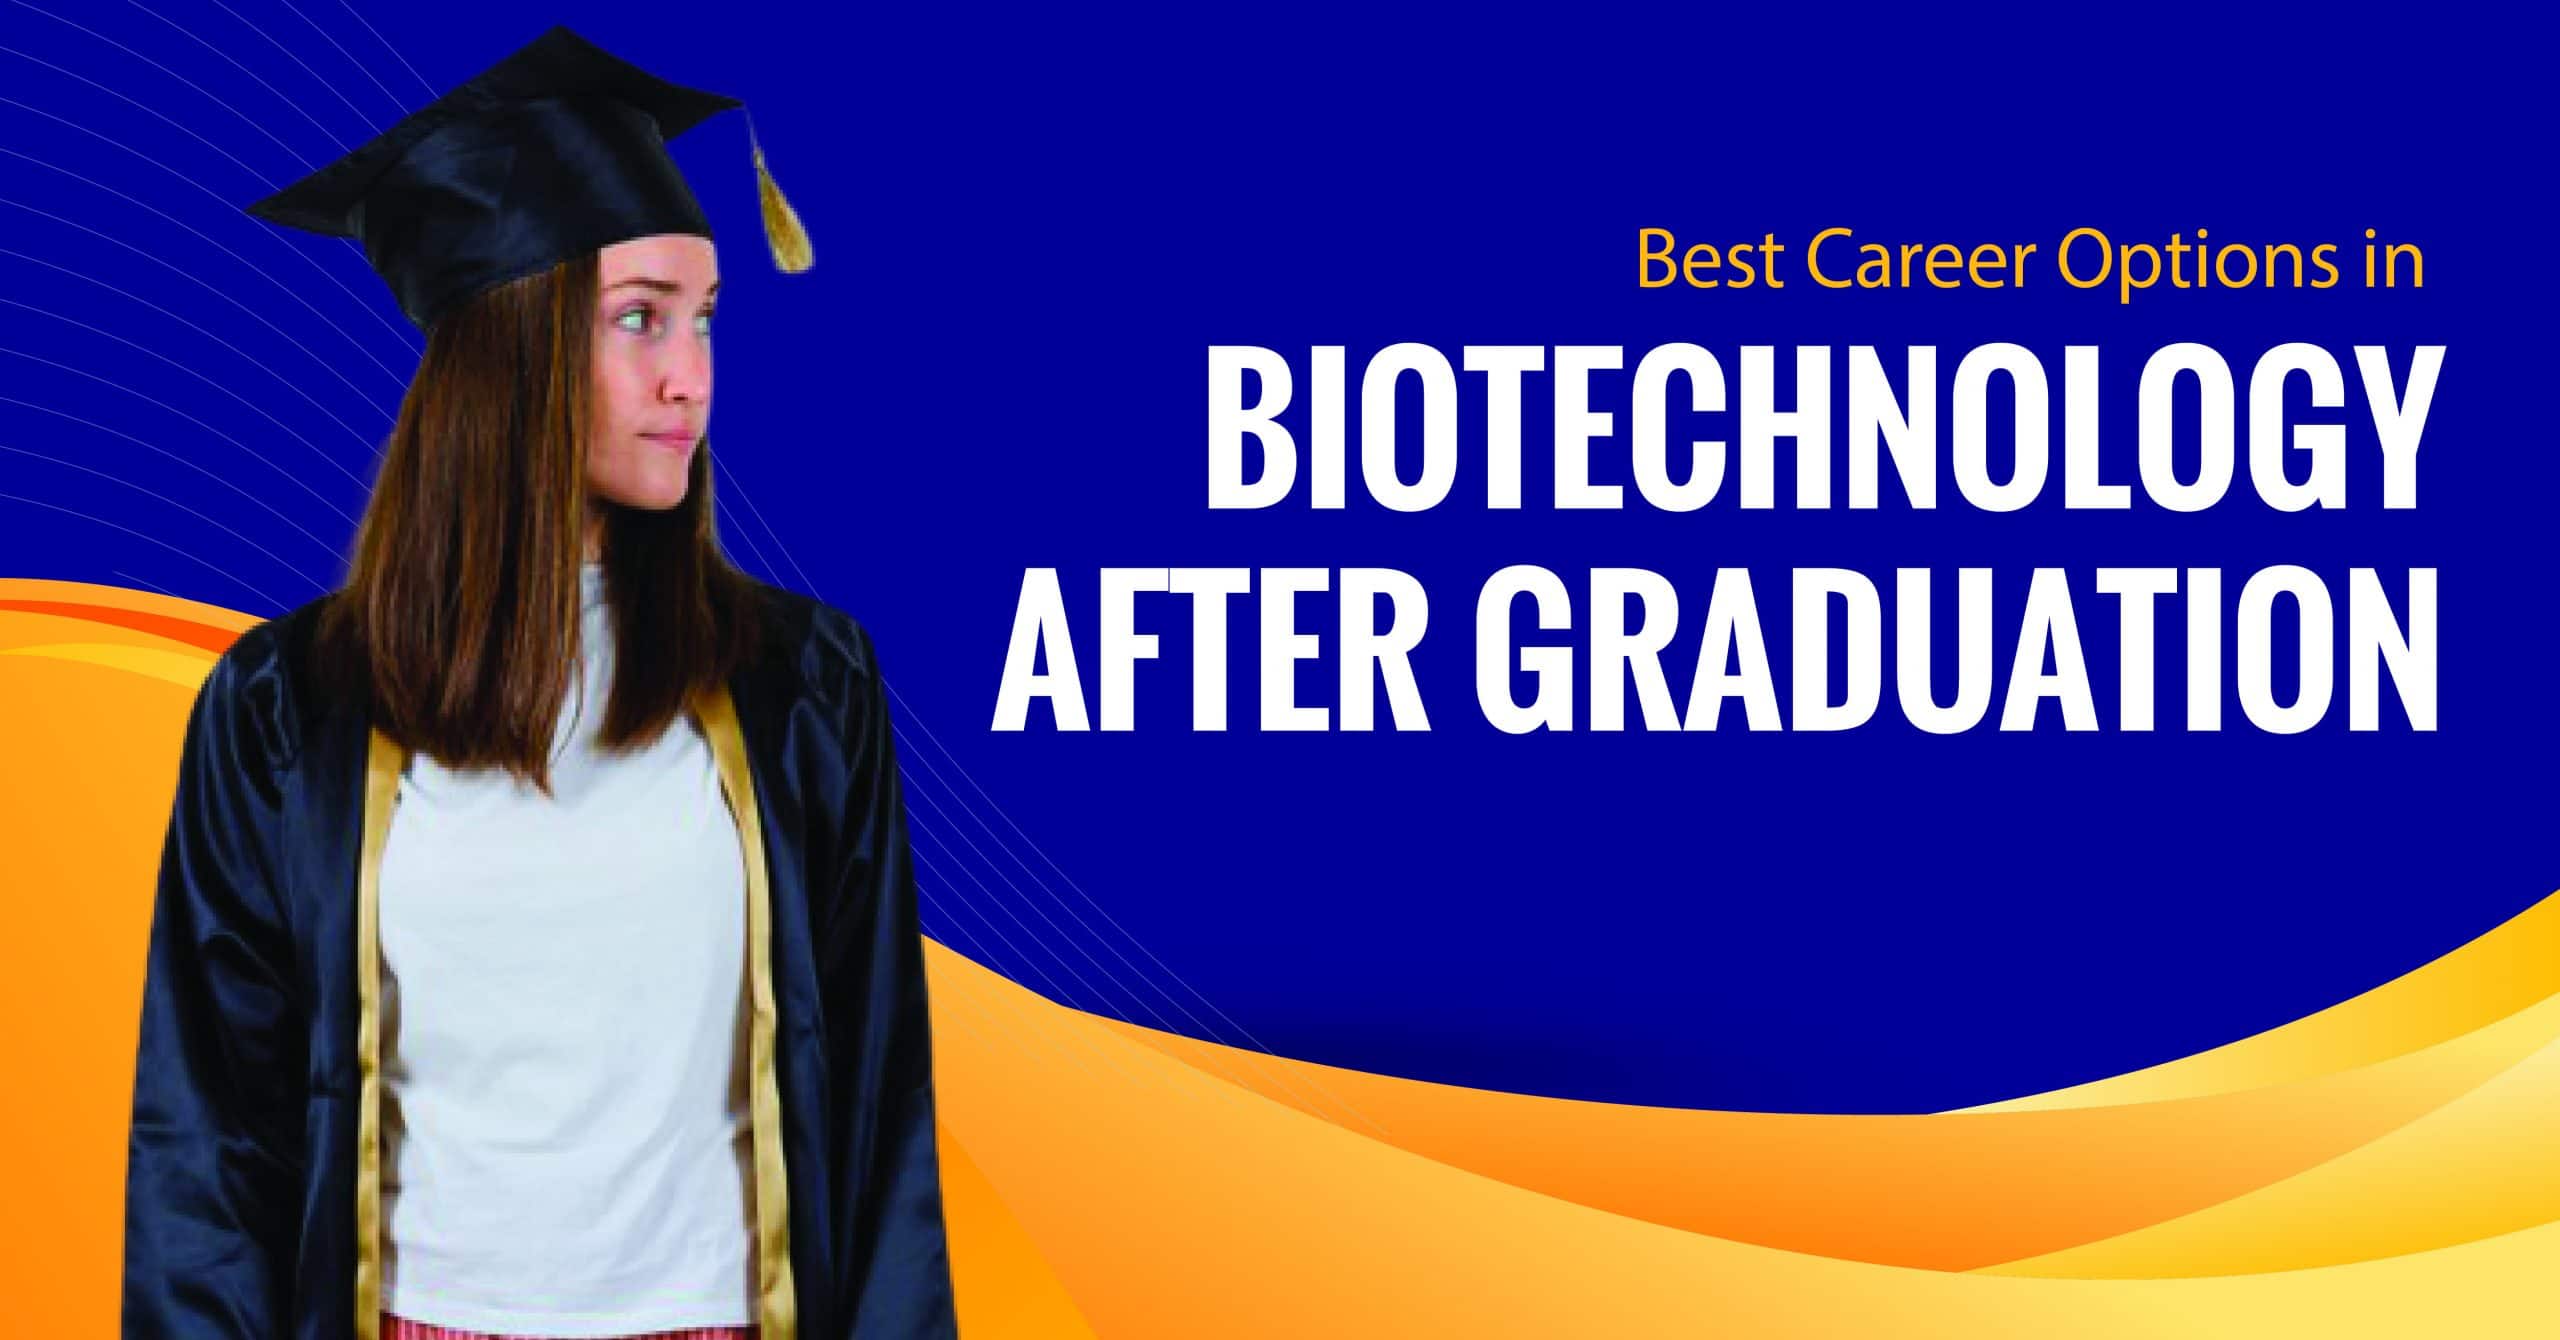 10 Best Career Options in Biotechnology After Graduation in Bio